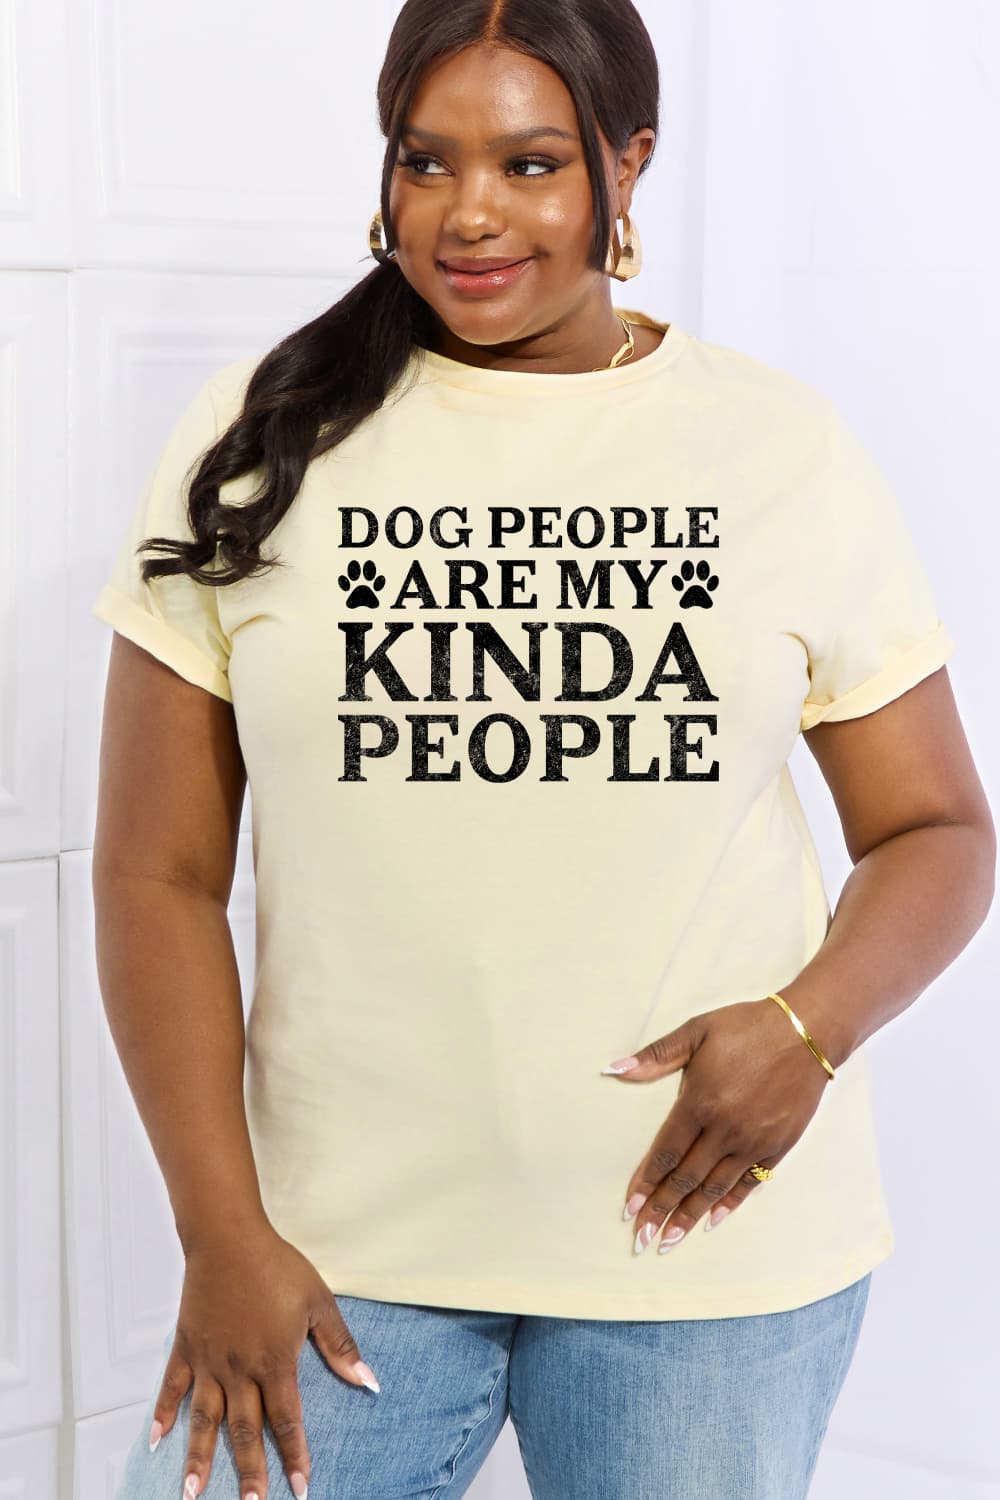 DOG PEOPLE ARE MY KINDA PEOPLE Graphic Cotton Tee - Beige / S - T-Shirts - Shirts & Tops - 7 - 2024